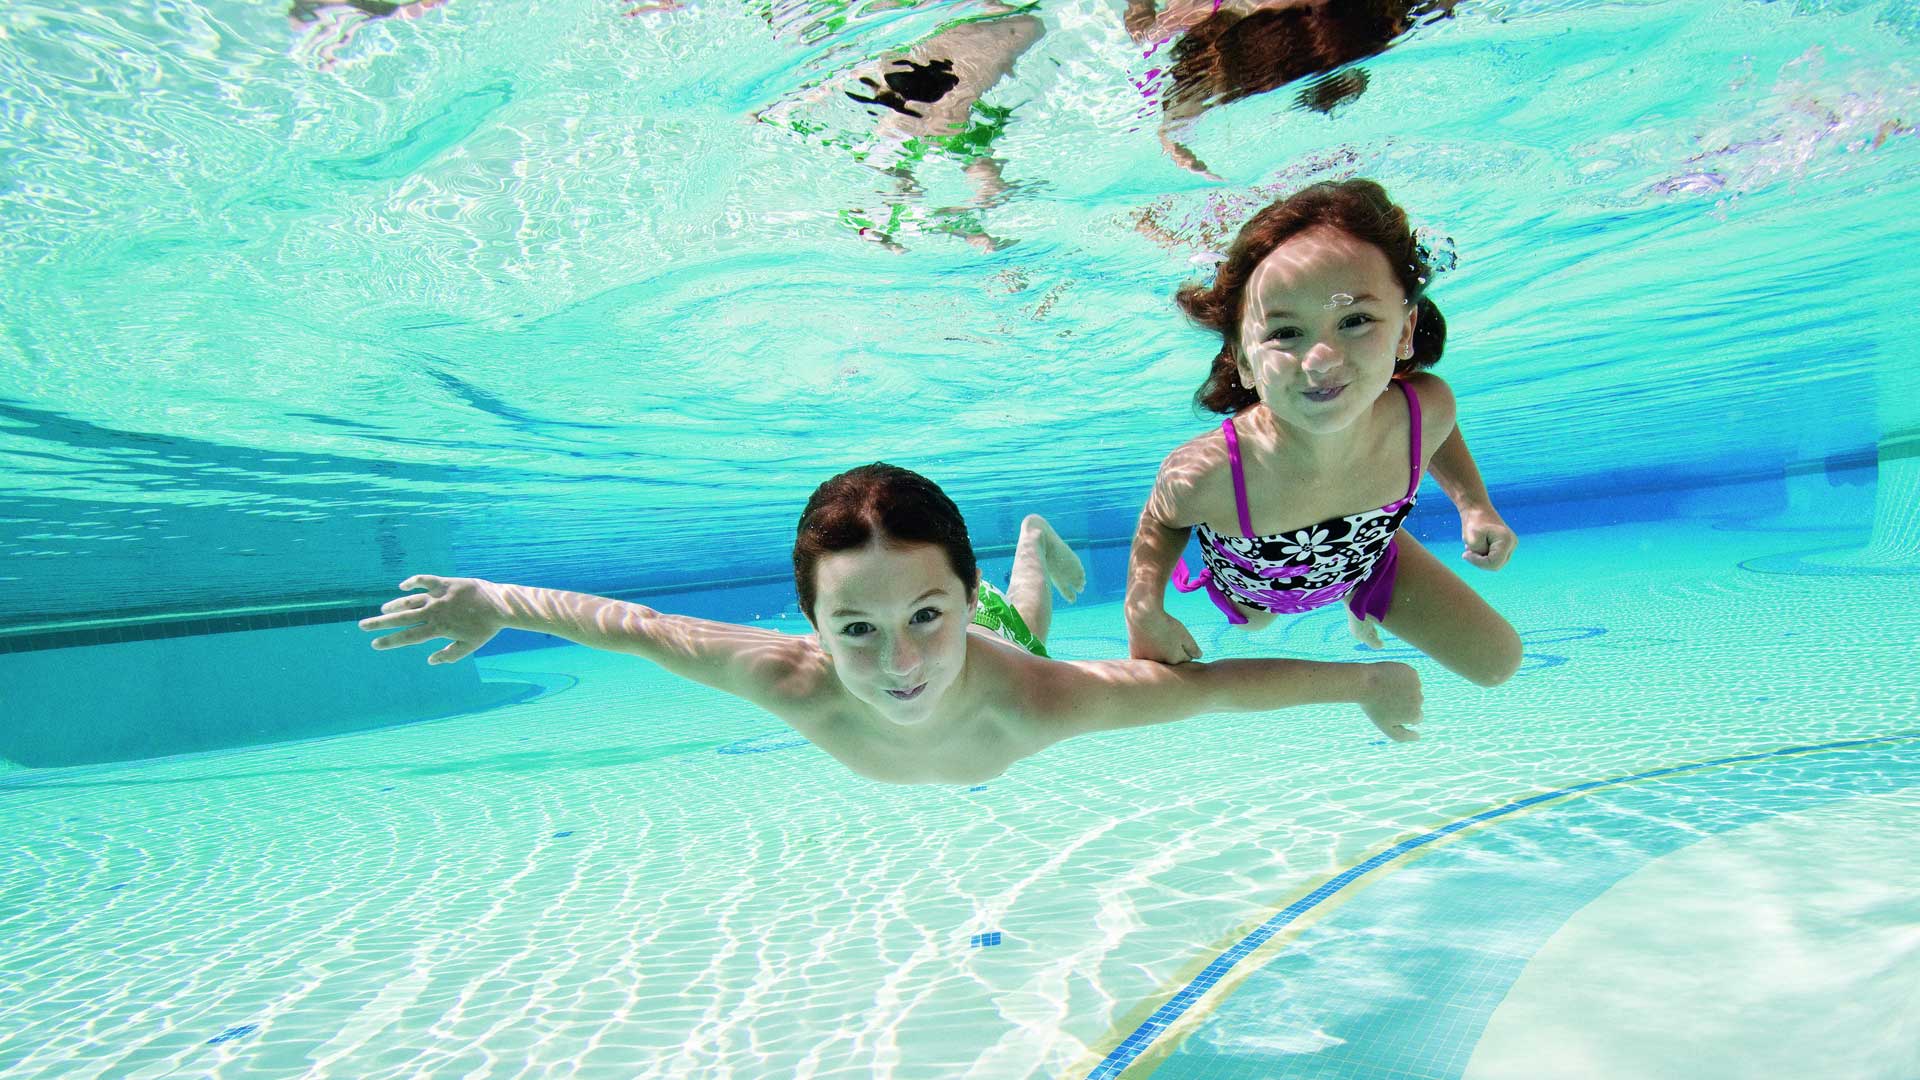 7 Steps to Keep Your Kids Safe at the Pool